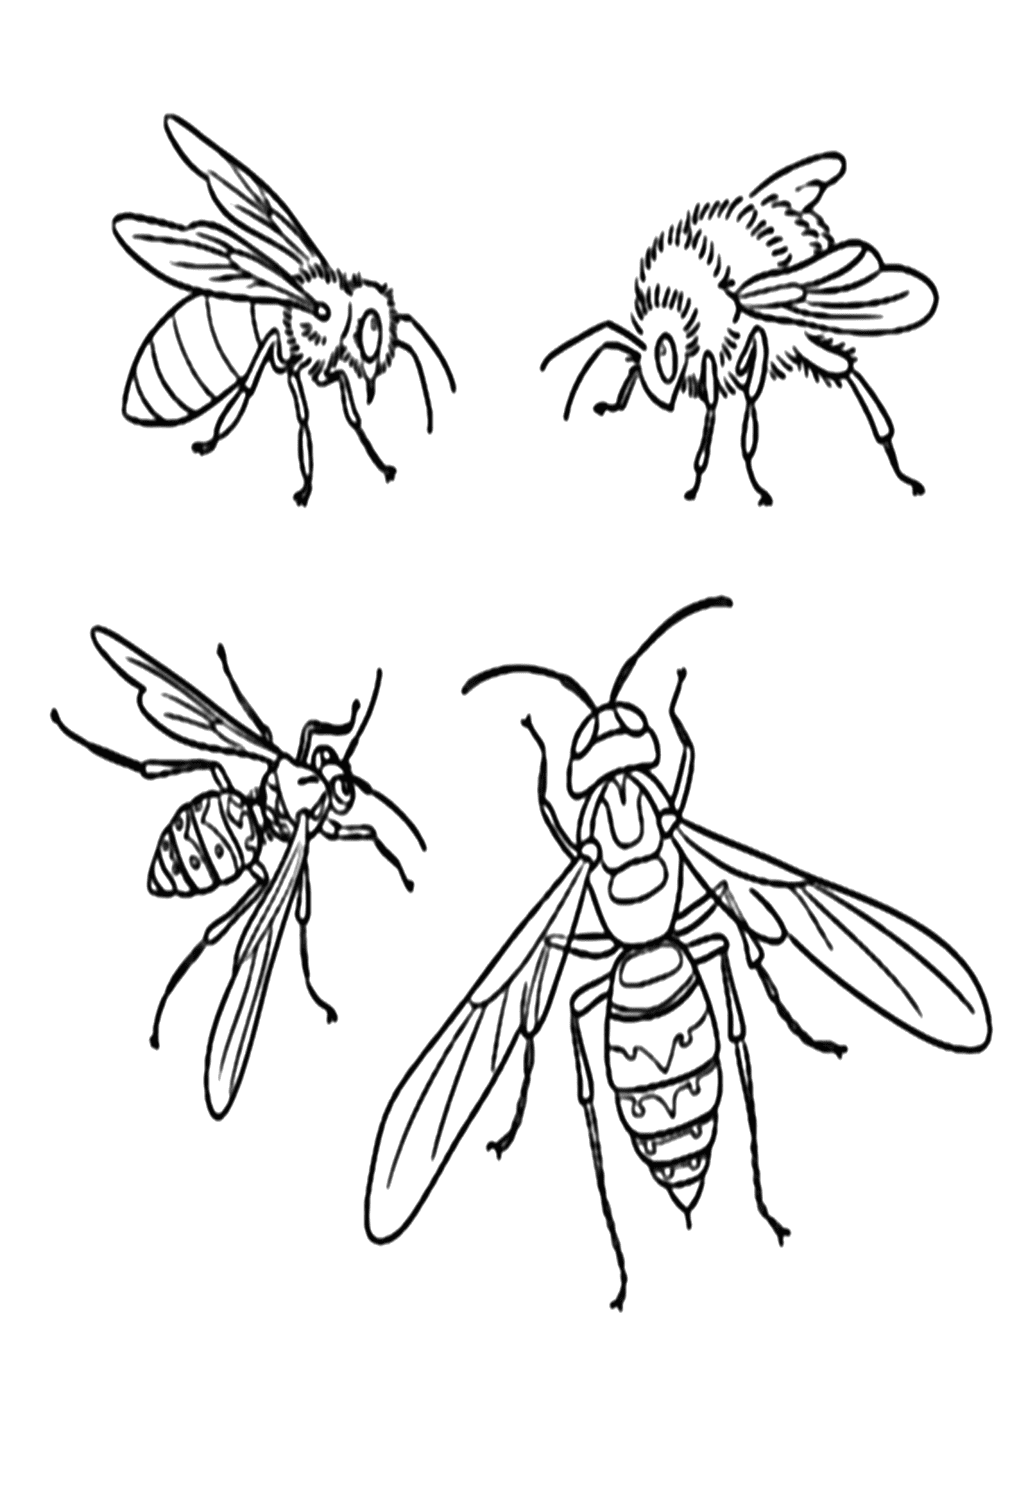 Bee Wasp Bumblebee And Hornet Coloring Page from Wasp